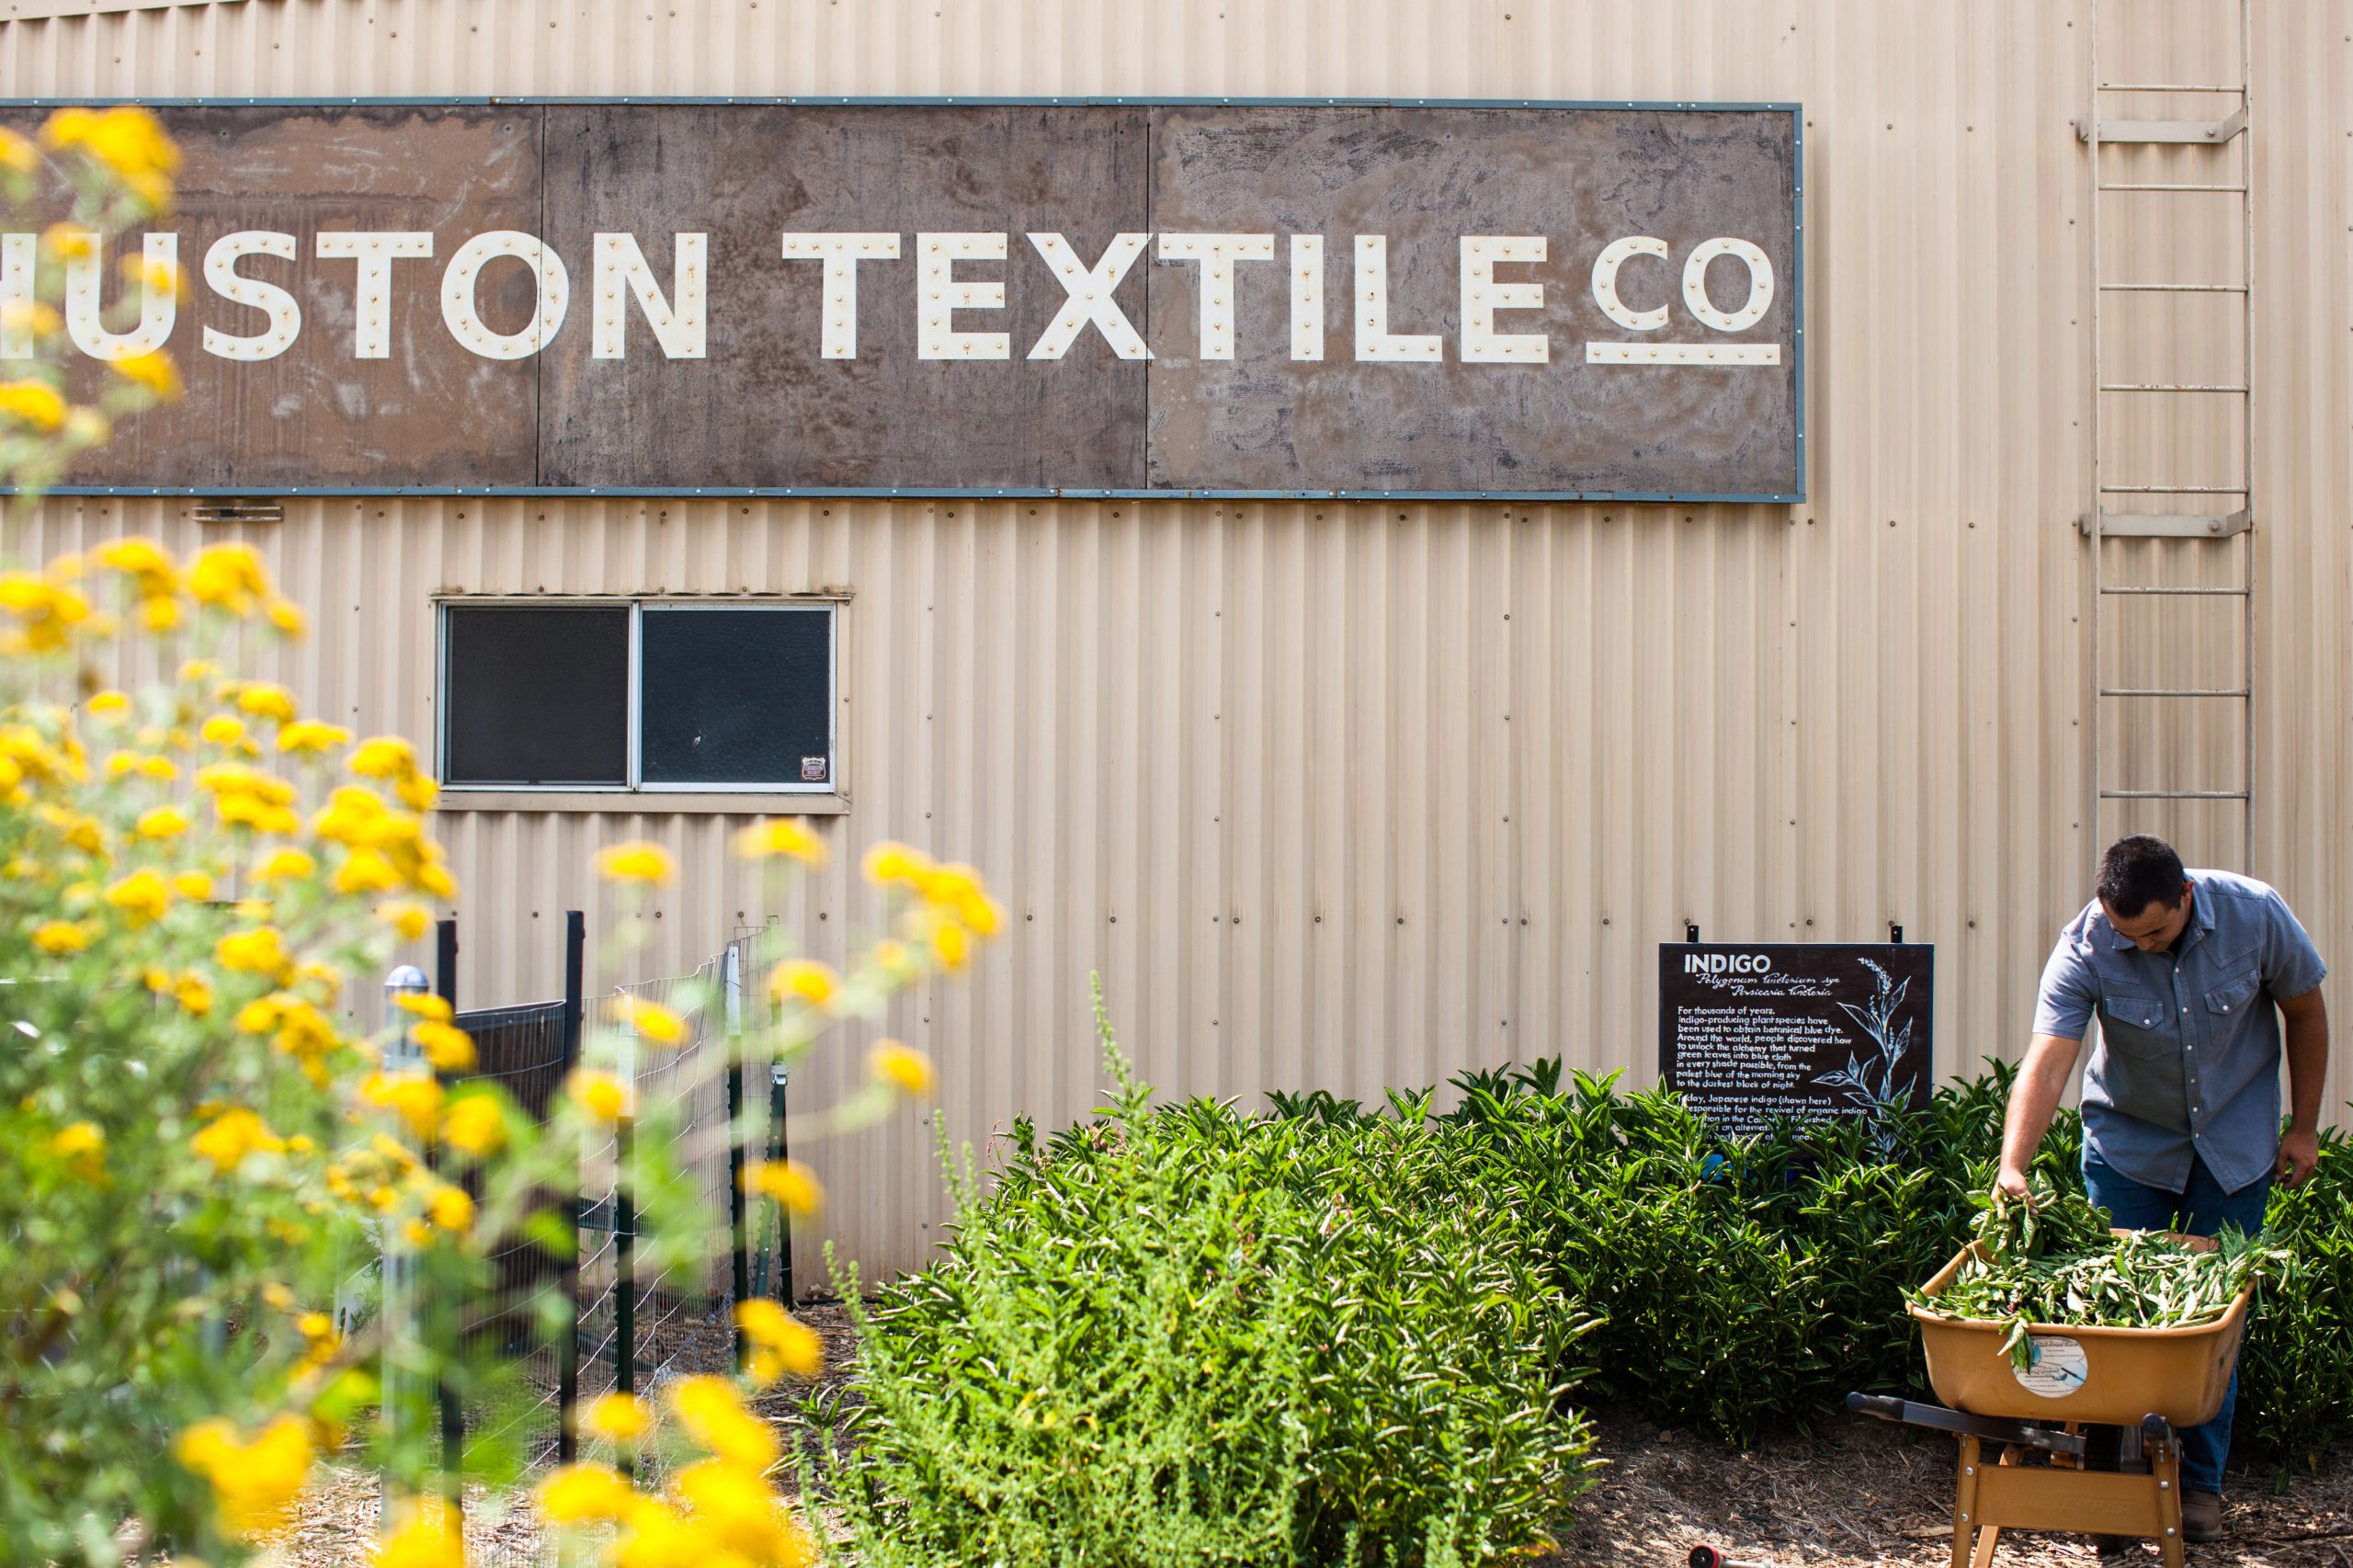 photograph-of-outside-of-huston-textile-company-with-brown-sign-and-garden-with-worker